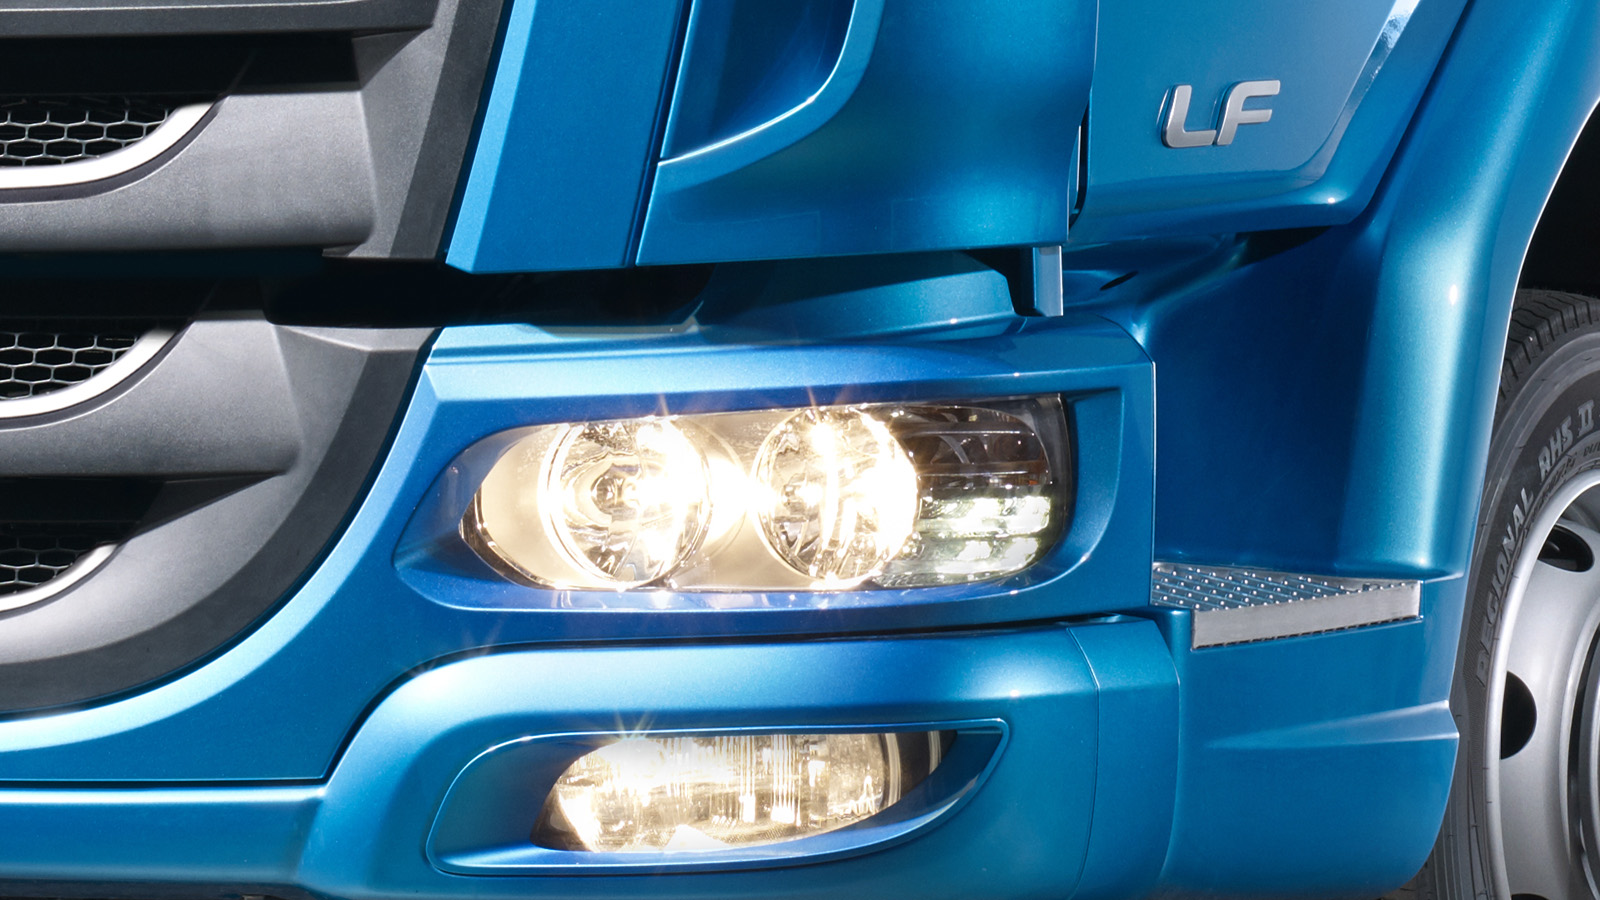 DAF The New LF features